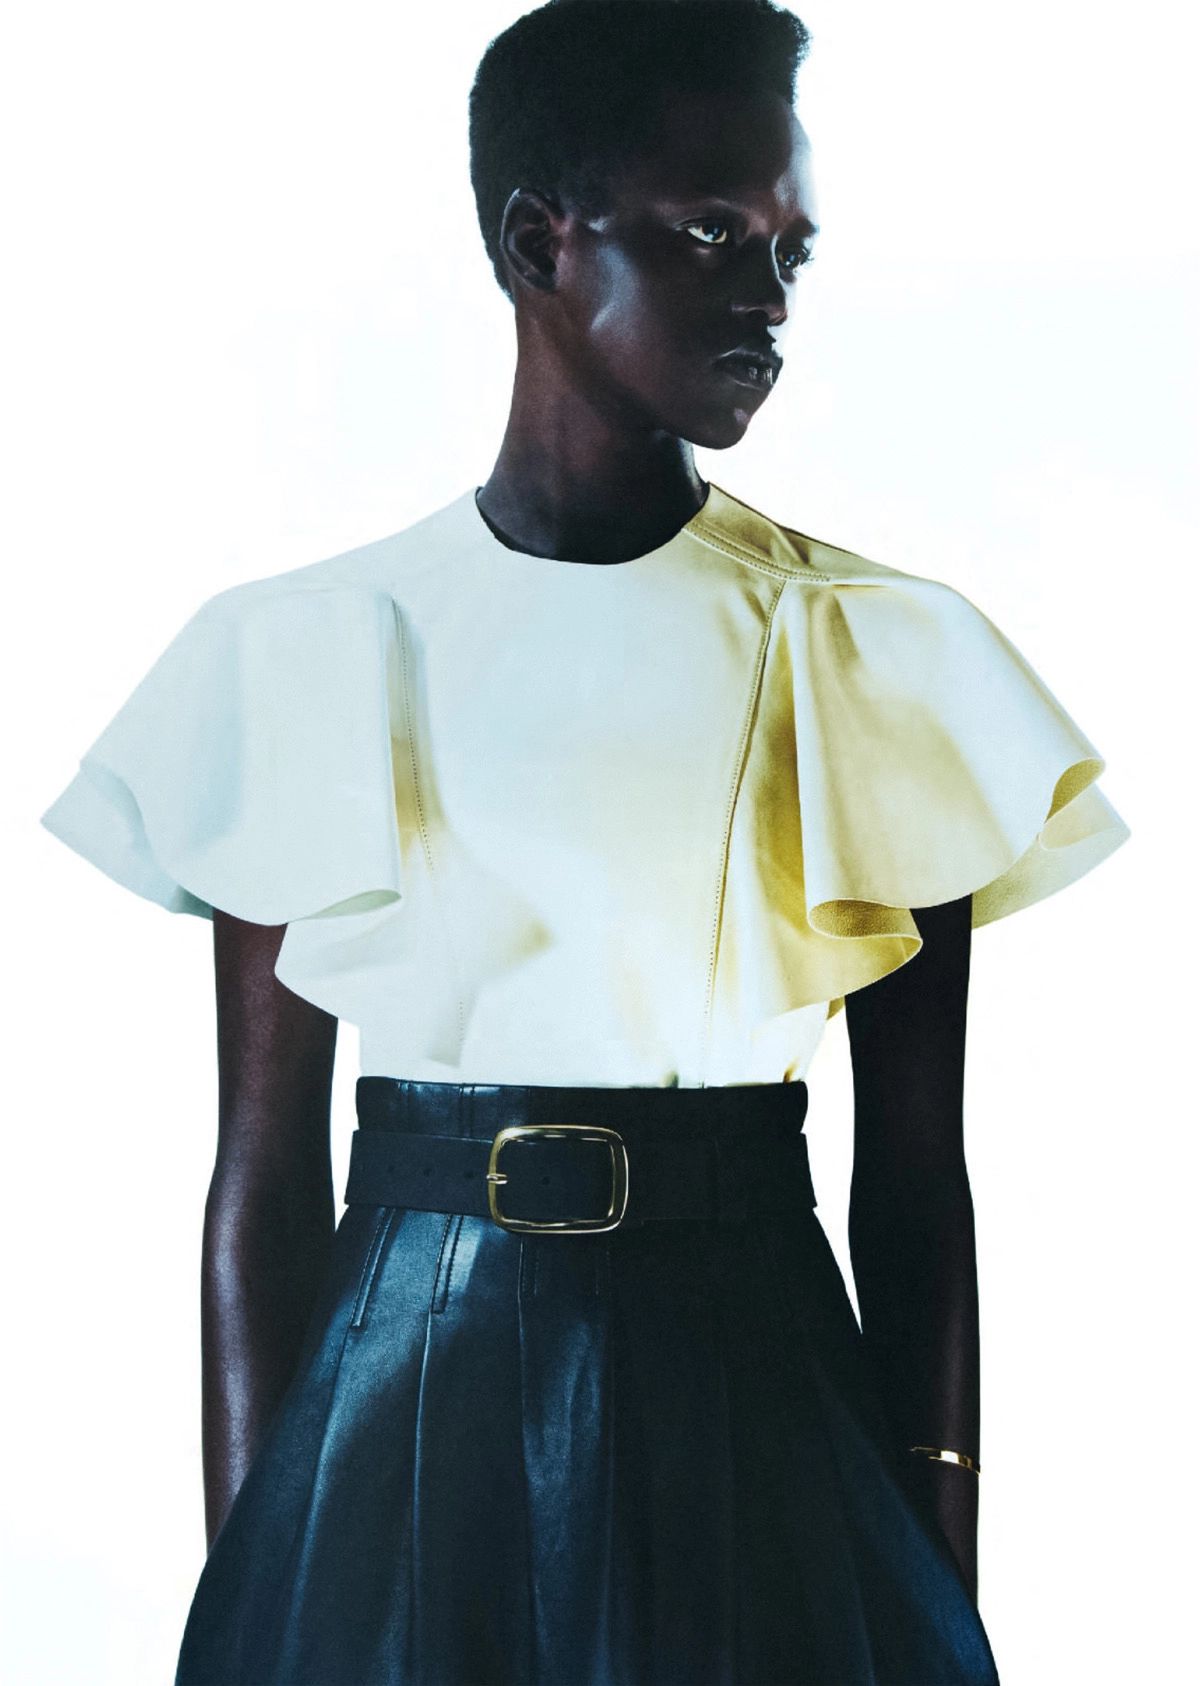 Alaato Jazyper by Thue Norgaard for British Vogue July 2022  Ruffled Leather Top by Chloe / Belted Leather Skirt by Chloe / Essential Bangle Bracelet by Monica Vinader